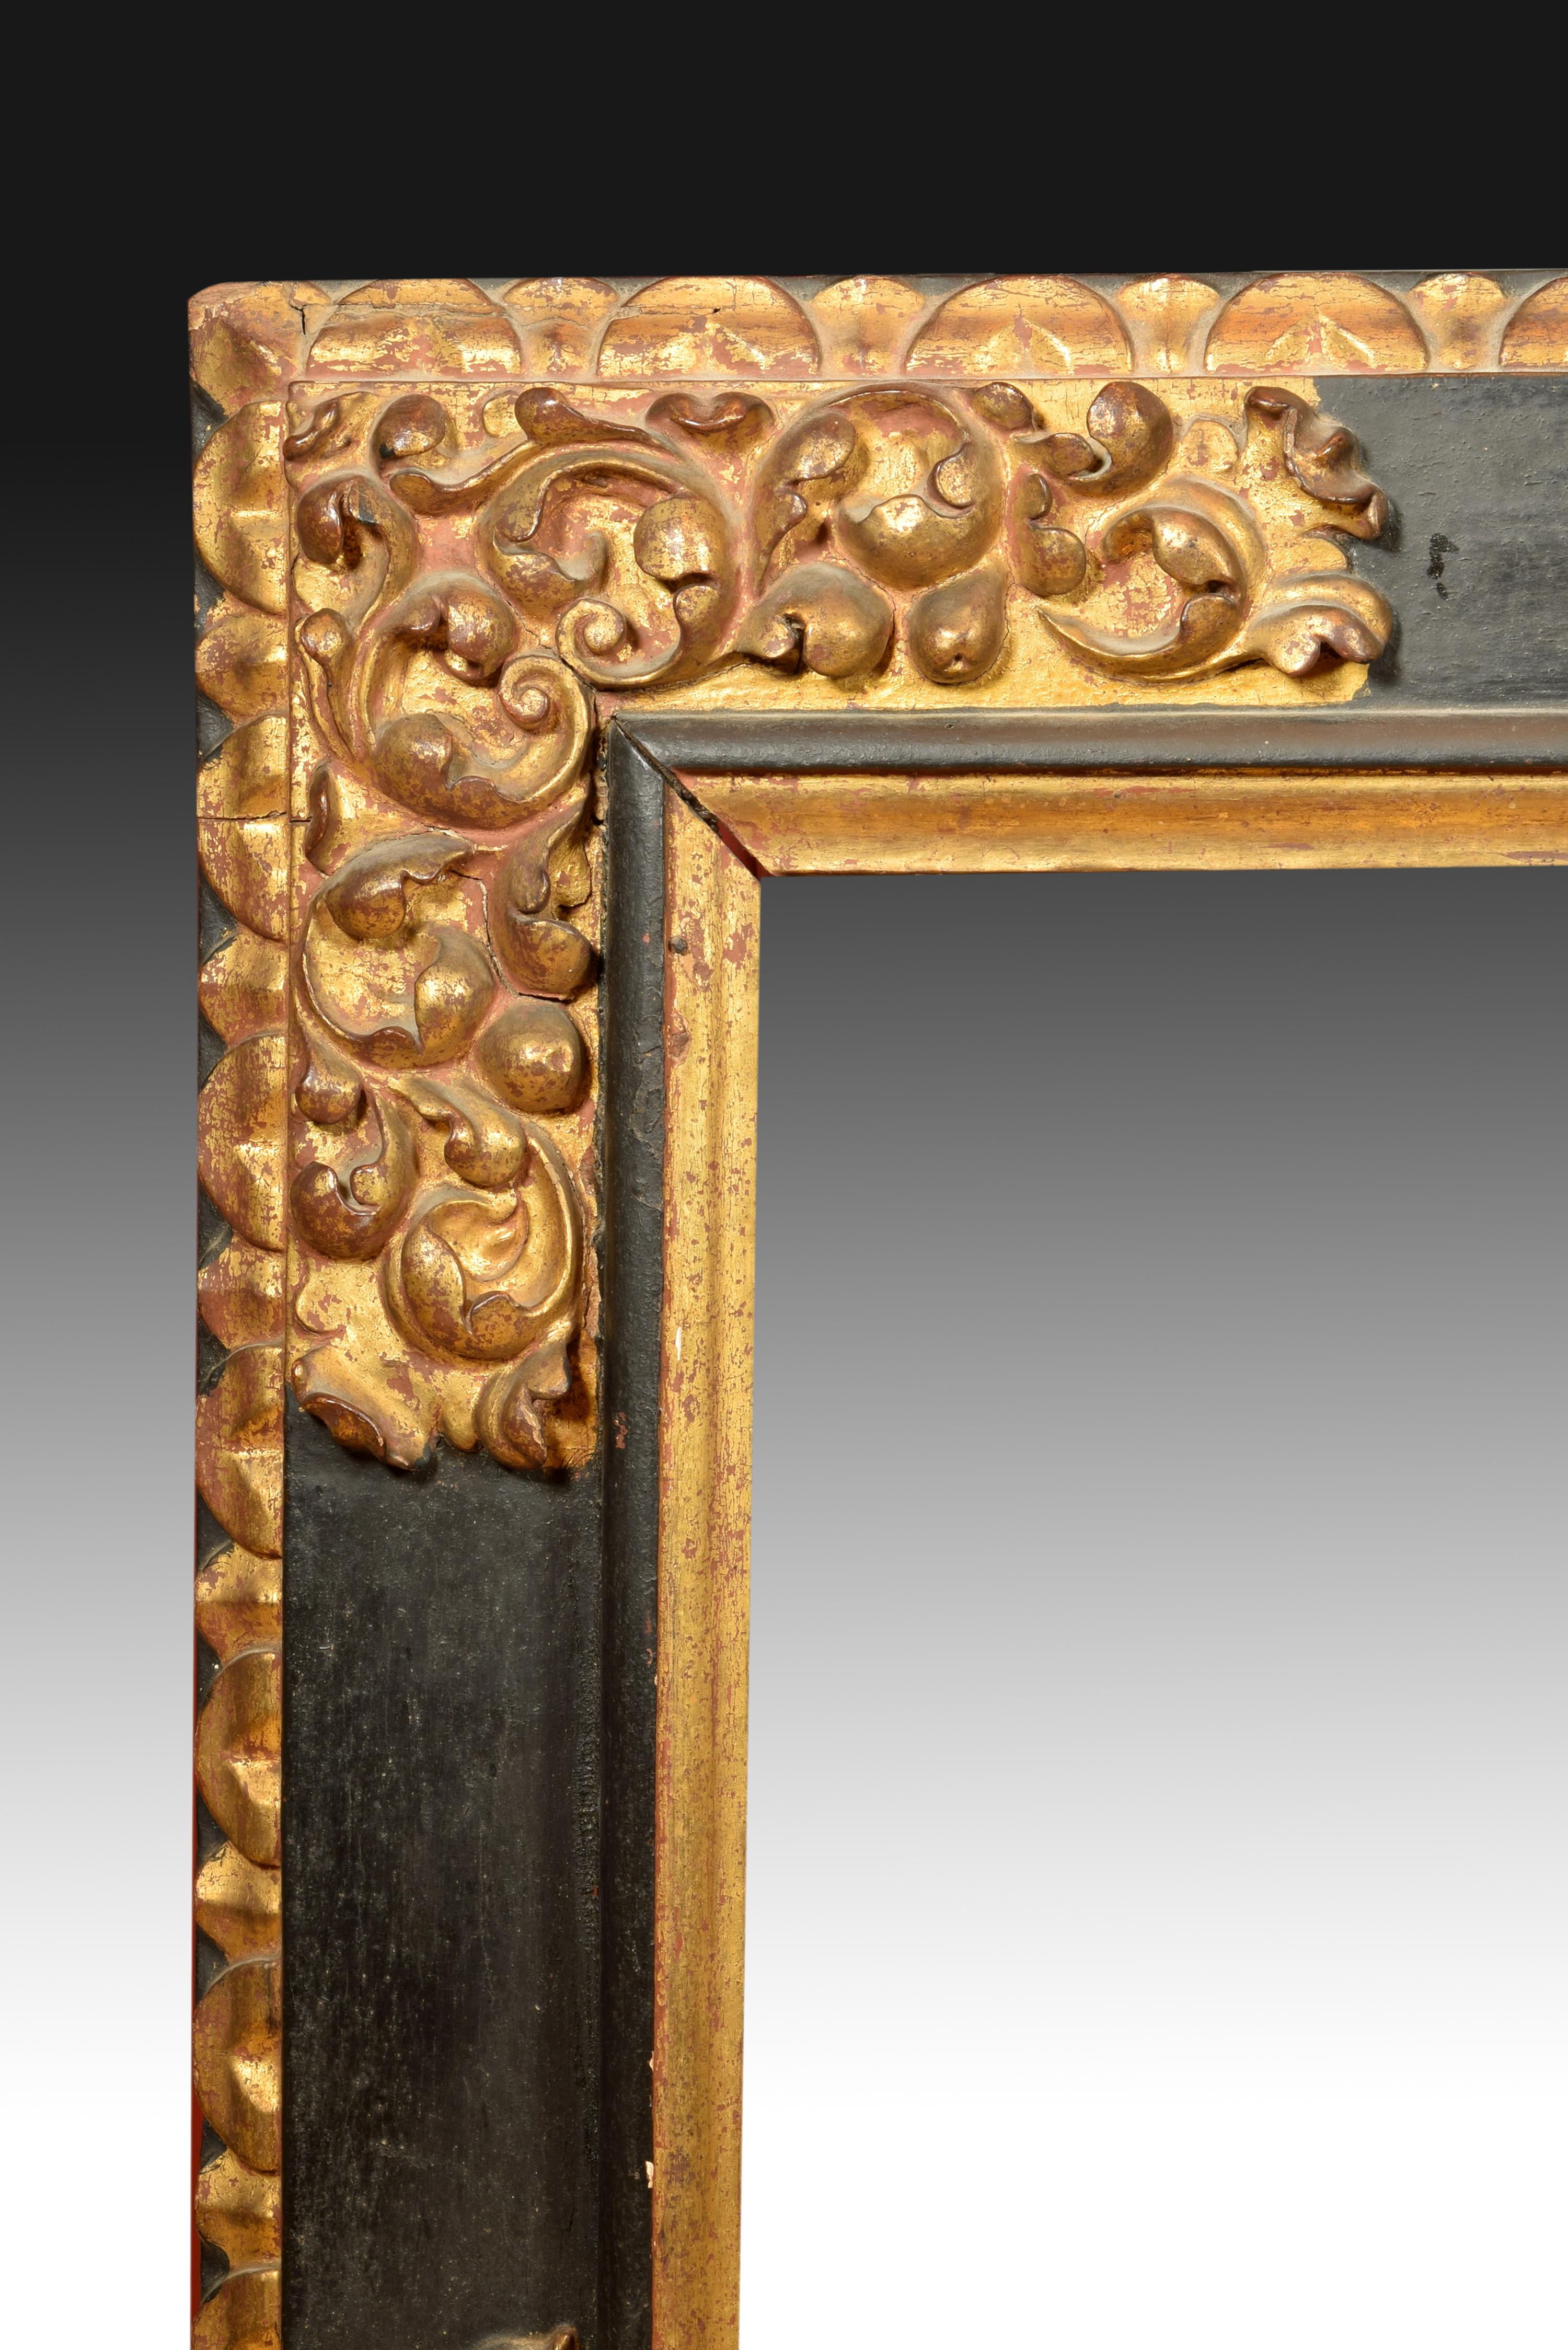 Rectangular frame of carved and polychrome wood decorated with a band on the golden exterior, another one on the smooth interior and, in the centre, a combination of thick vegetal elements carved together with dark areas, highlighting the gold. The